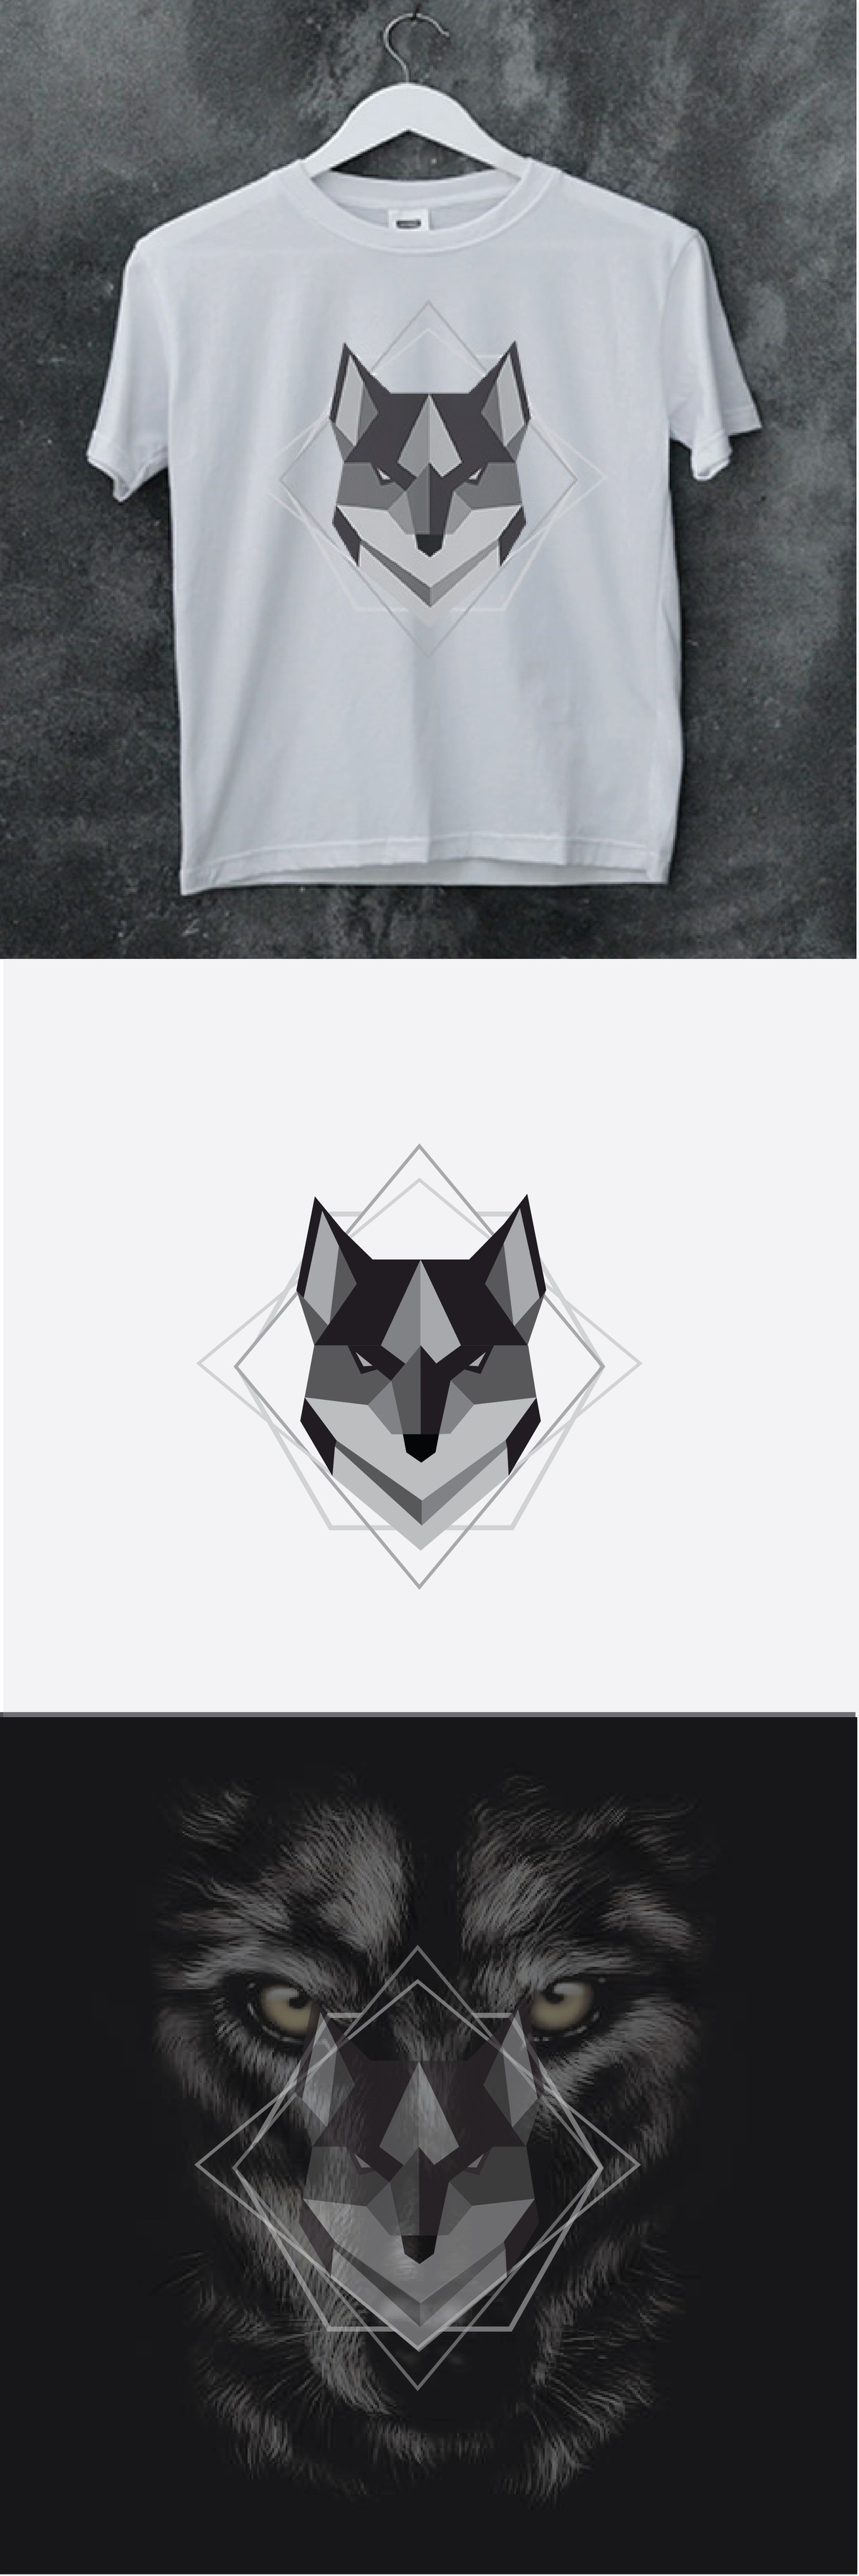 I generate design idea with jpg wolf image and i convert into geometrical style logo. I show's wolf design active , aggressive young persons . Design is vector format with large size and high resolution art.   